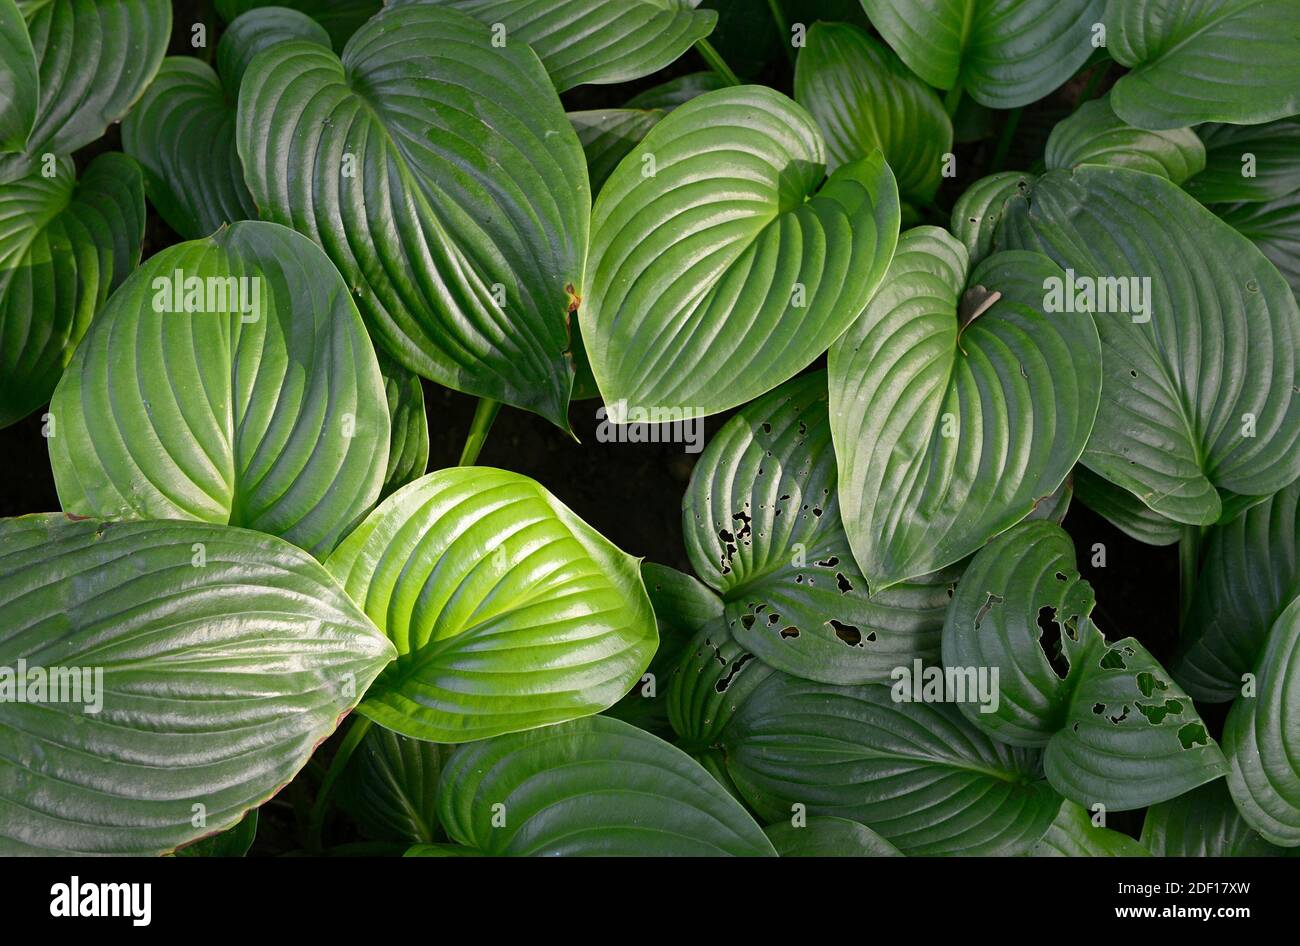 Hosta leaves densely cover the ground in a public park in Beijing, China Stock Photo